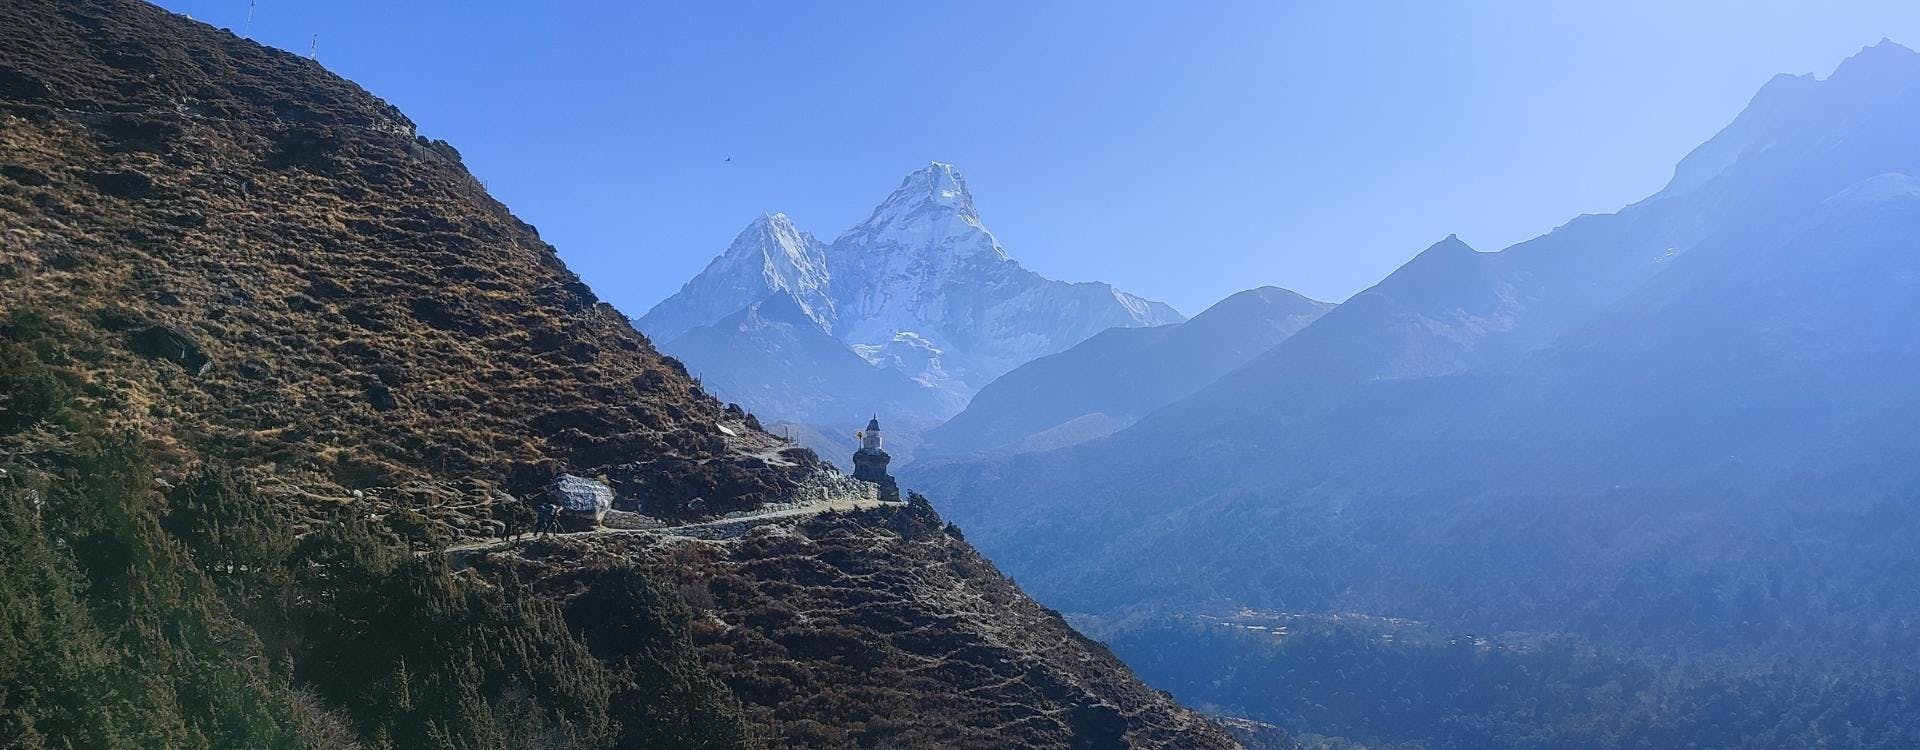 The Flora and Fauna of the Everest Region